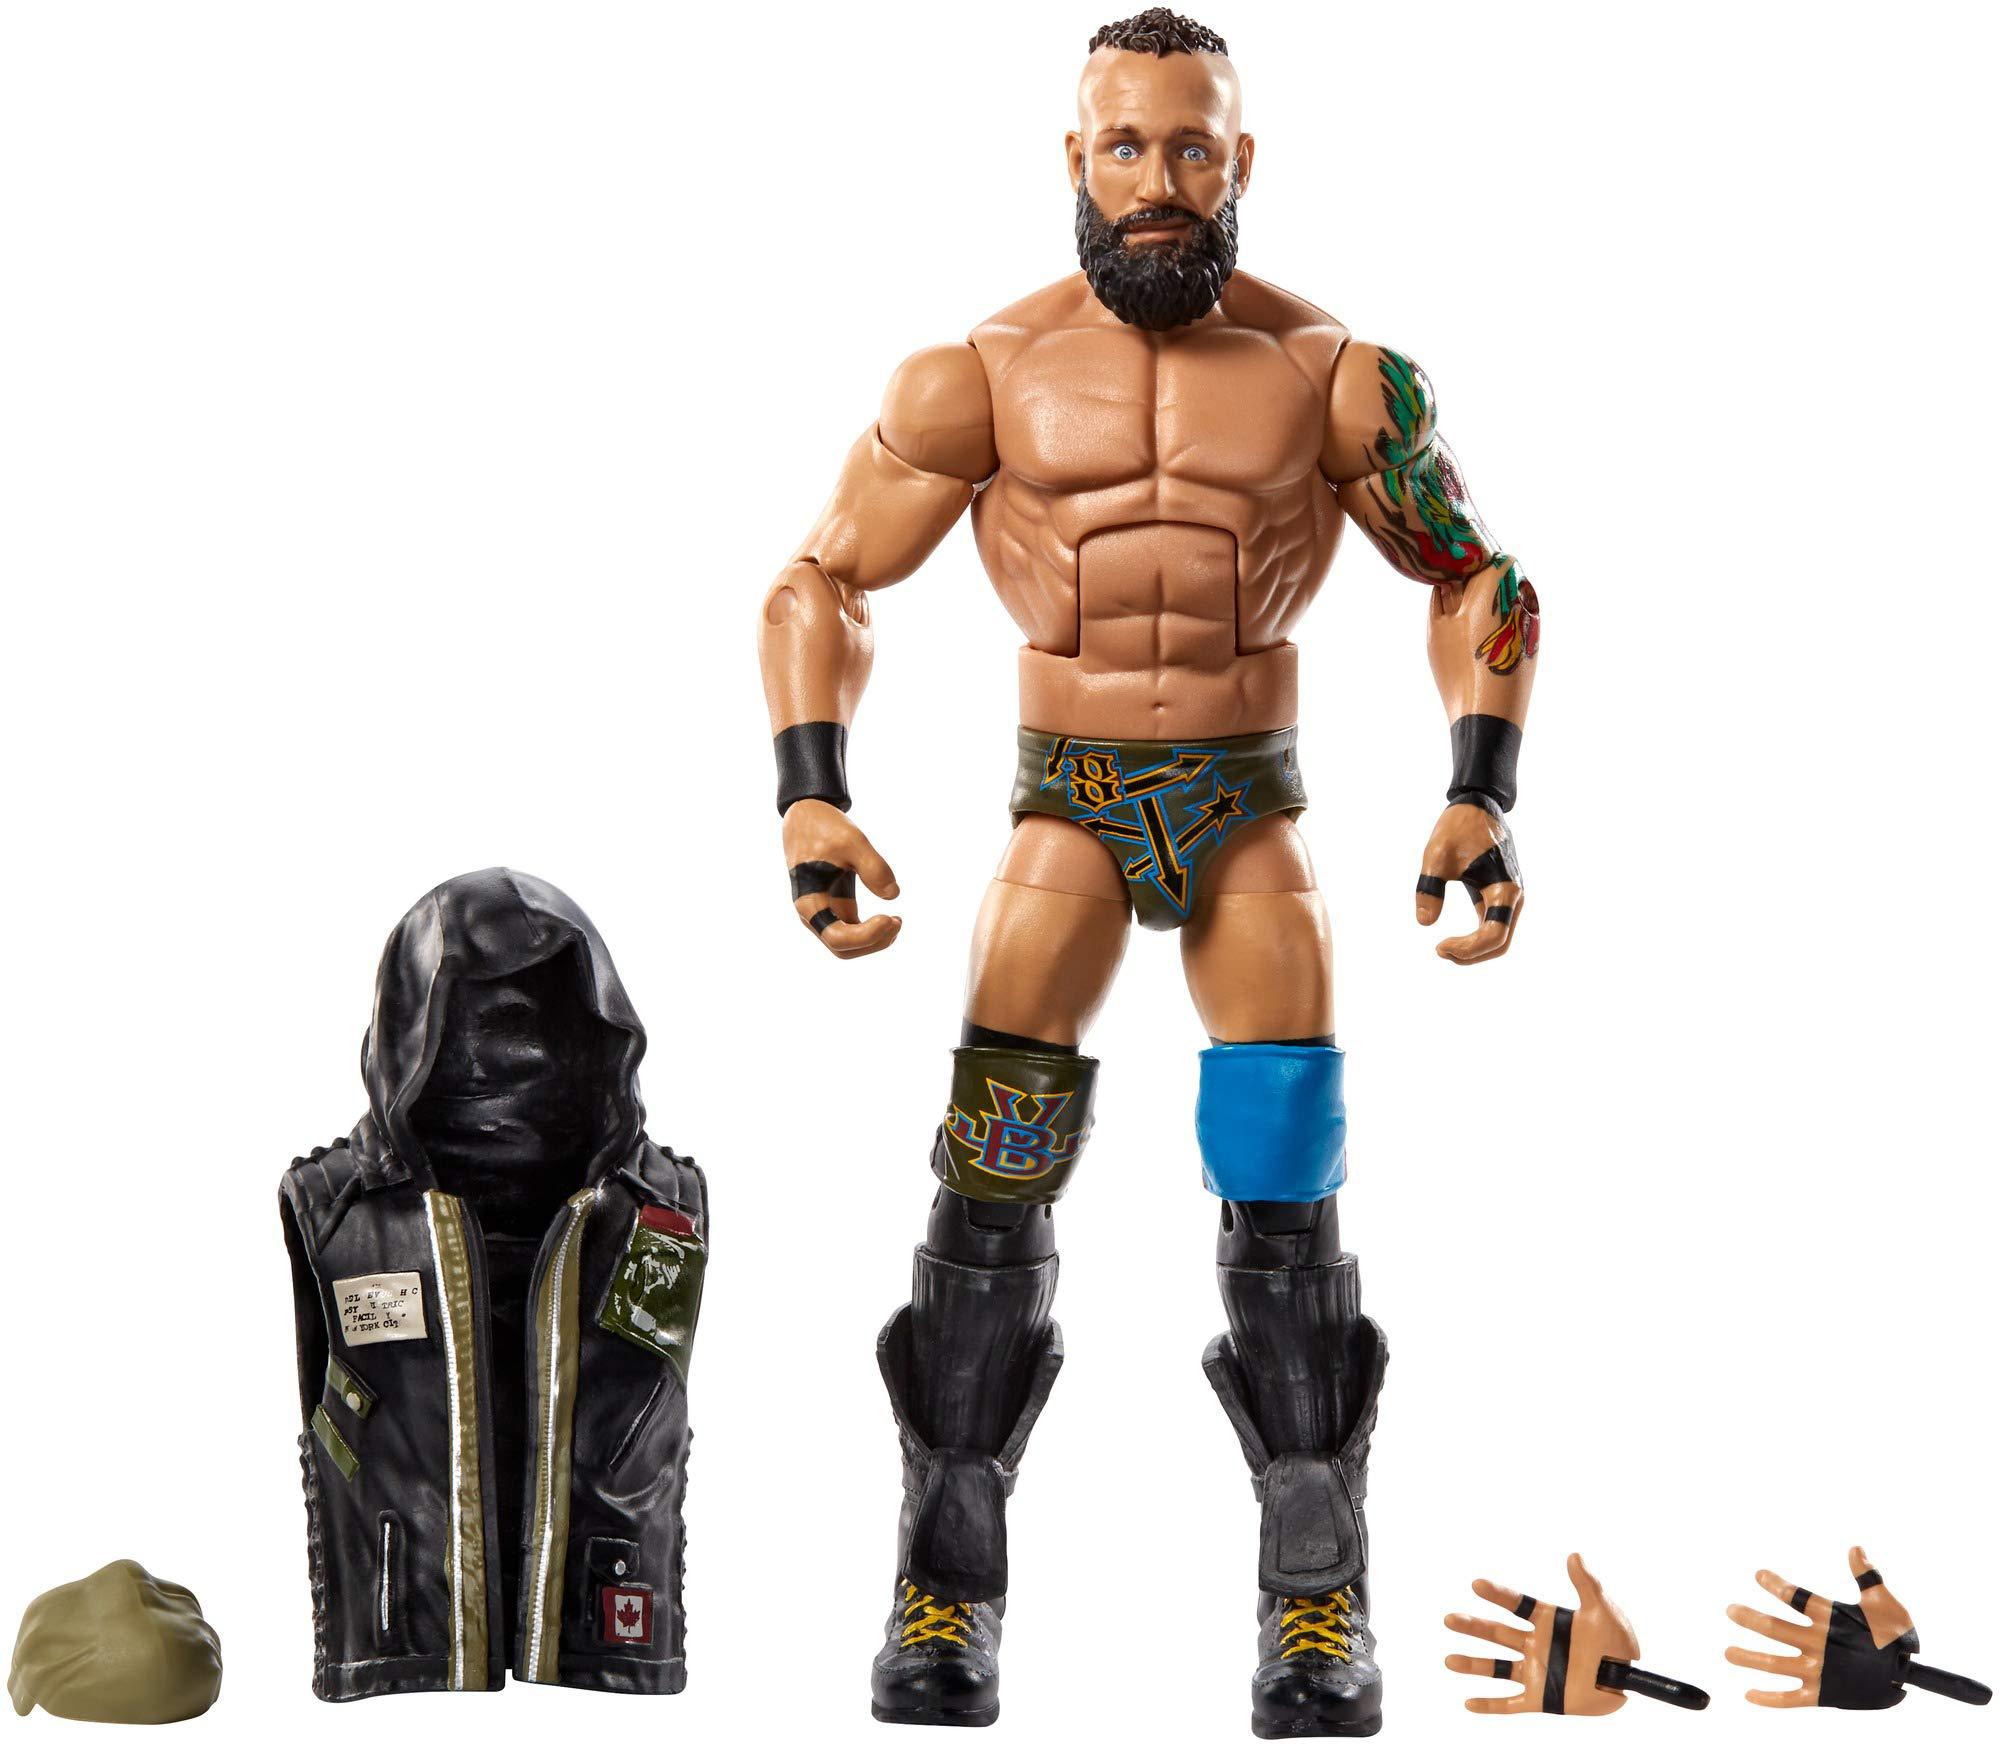 WWE Mattel wwe eric young elite collection deluxe action figure with realistic facial detailing, iconic ring gear & accessories